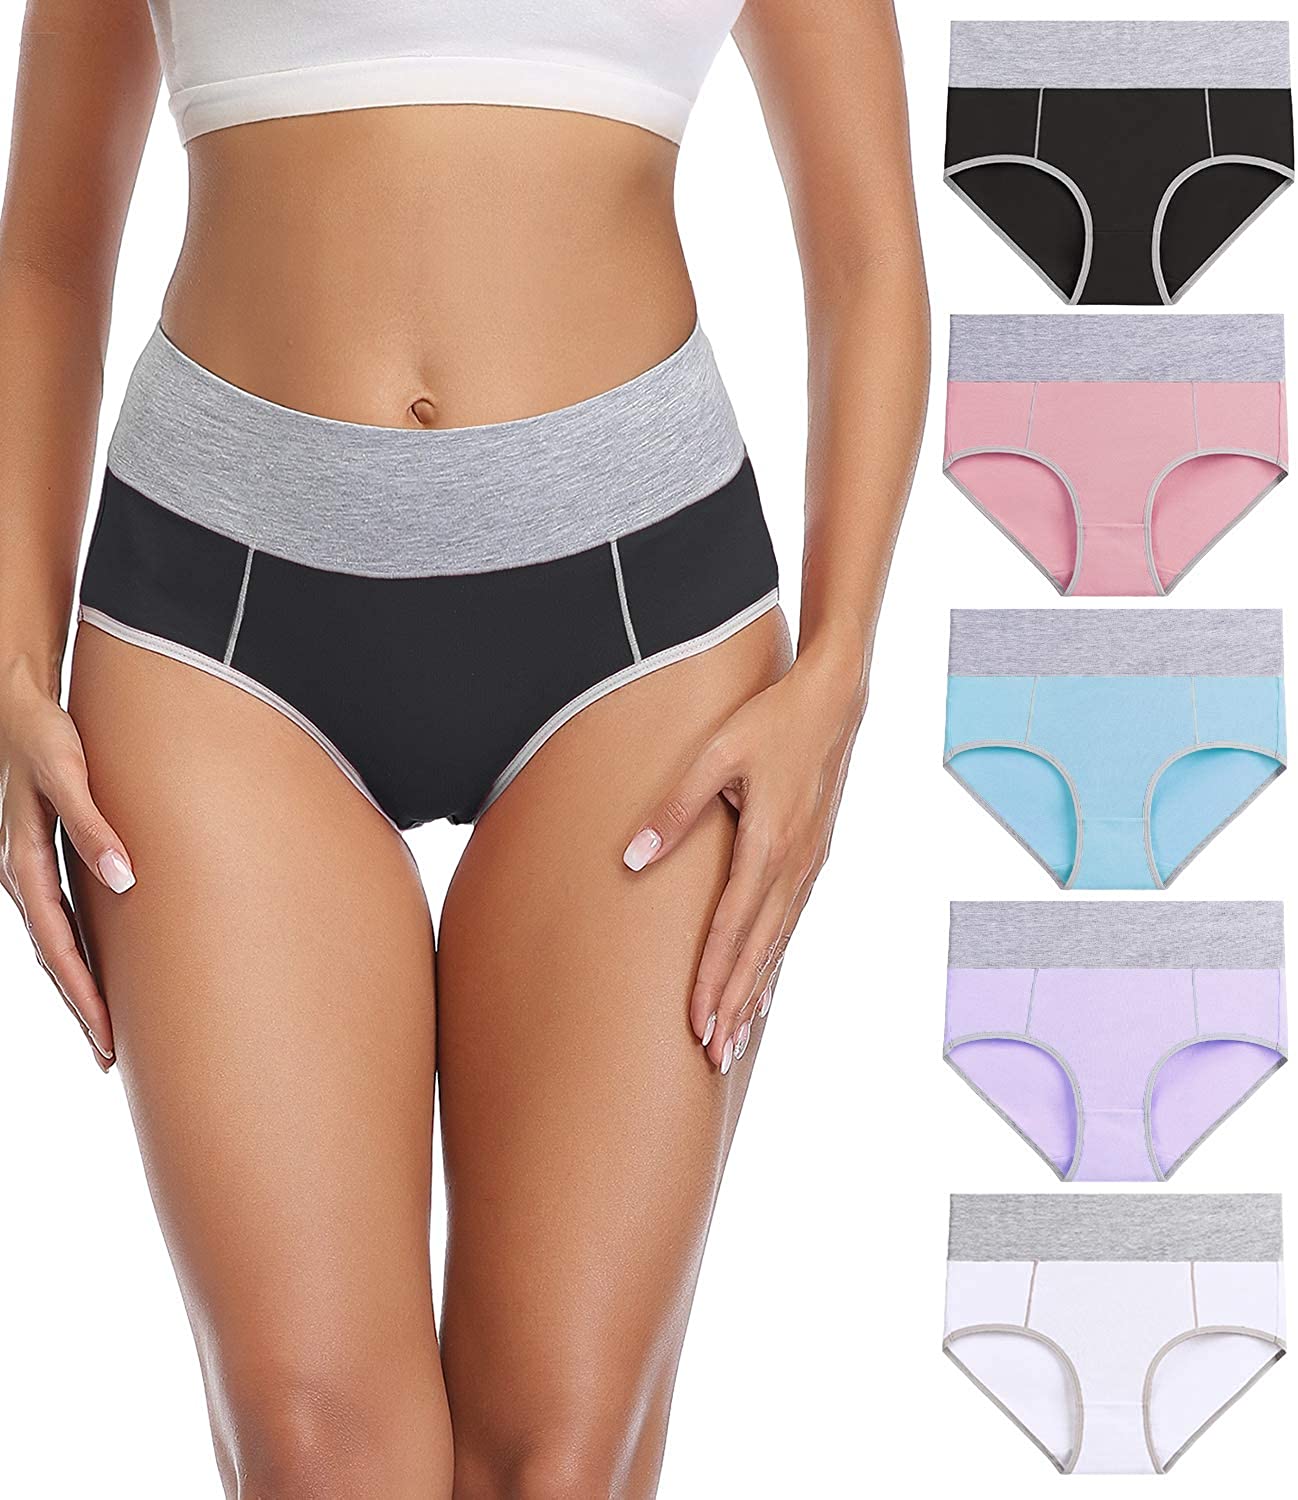 Women's High Waisted Cotton Underwear Soft Stretch Briefs Full Breathable Ladies Panties 5 Pack